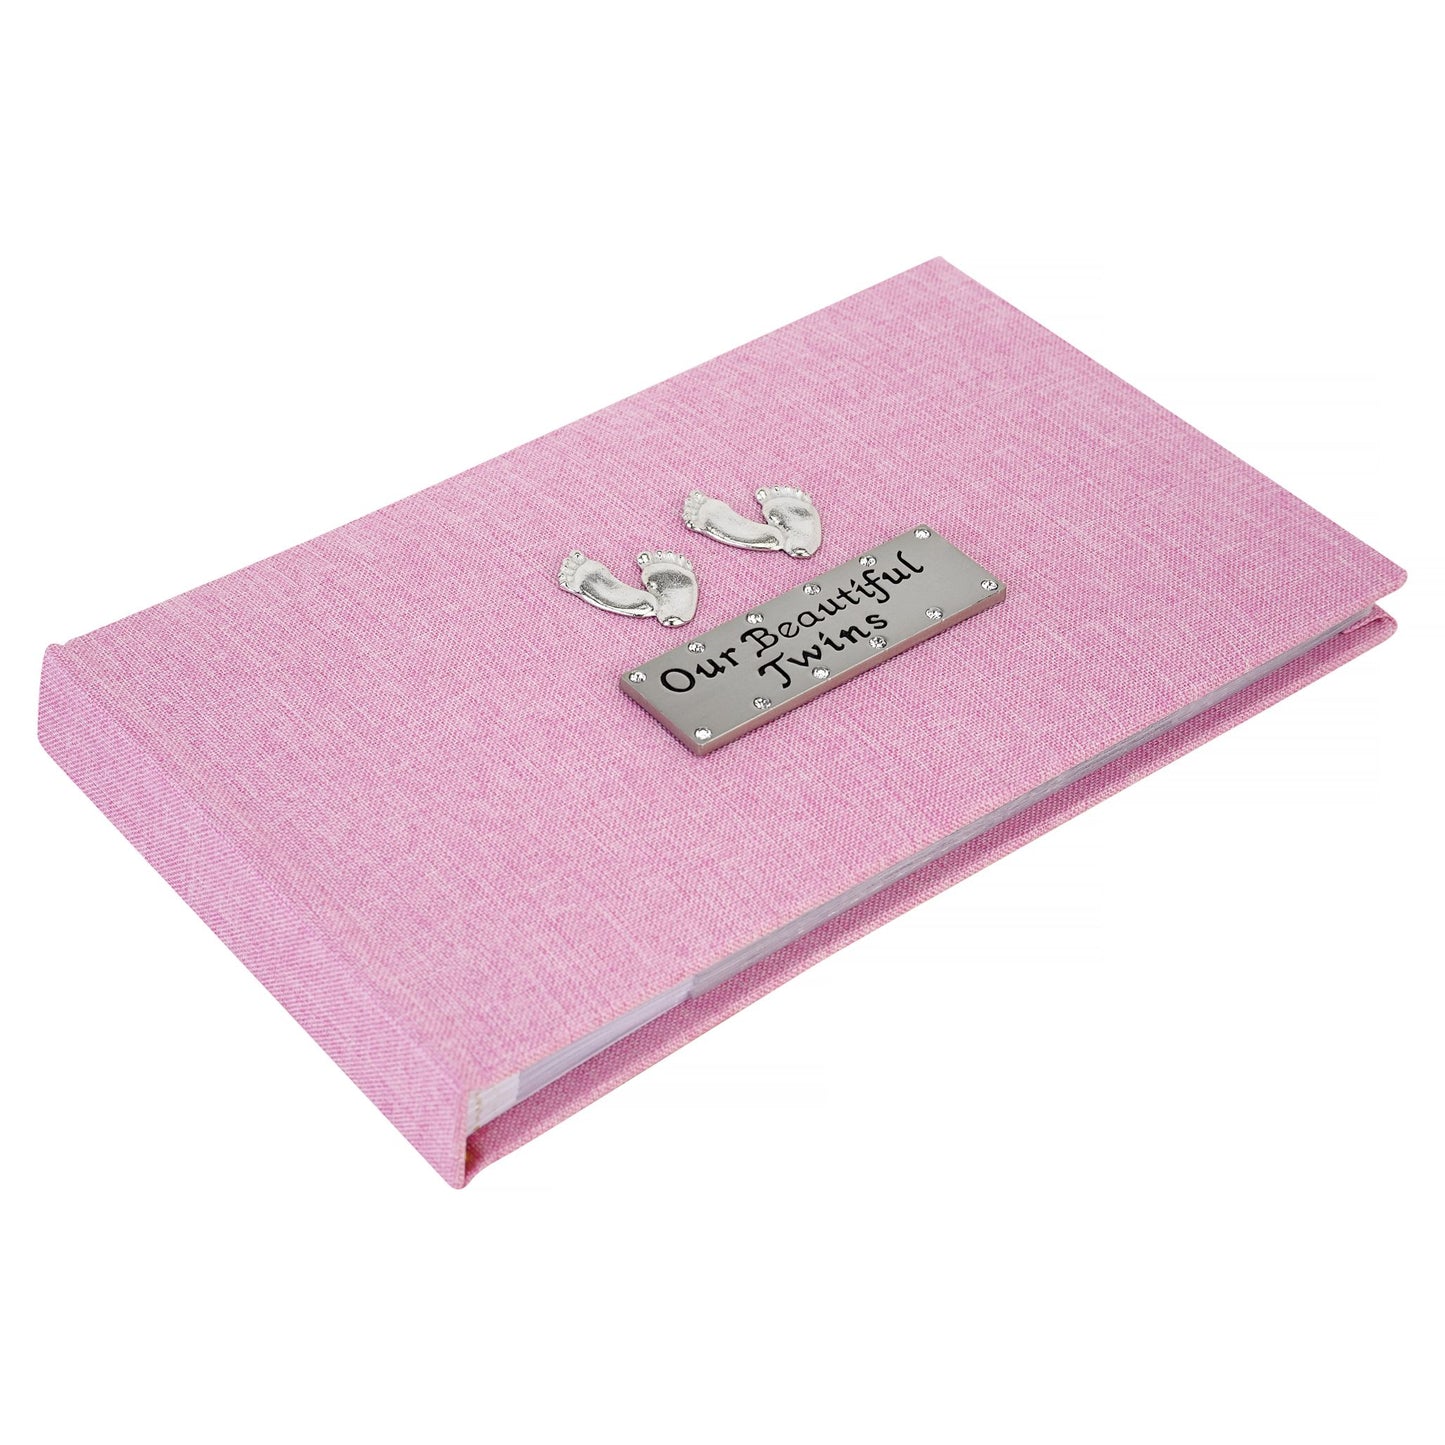 Our Beautiful Twins photo album (Blue/Pink/White options)